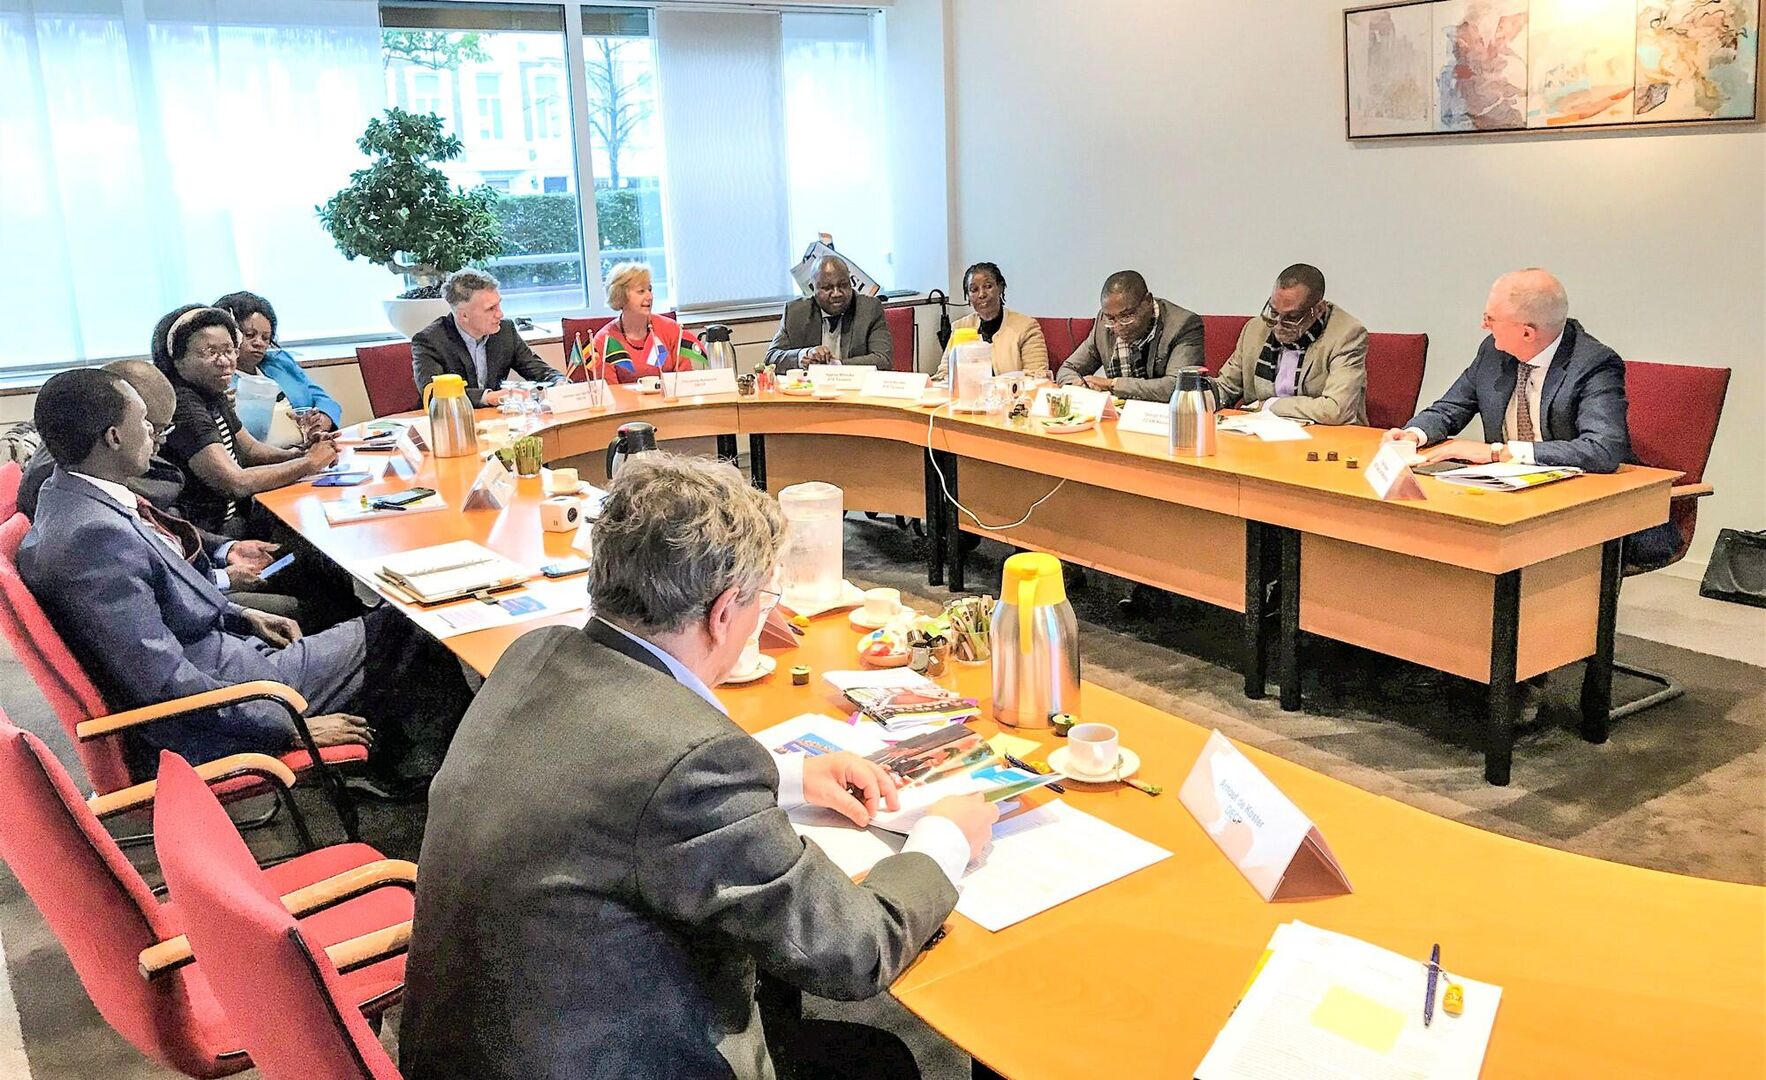 WORKING VISIT OF EAST AFRICAN EMPLOYERS’ ORGANISATIONS TO THE NETHERLANDS